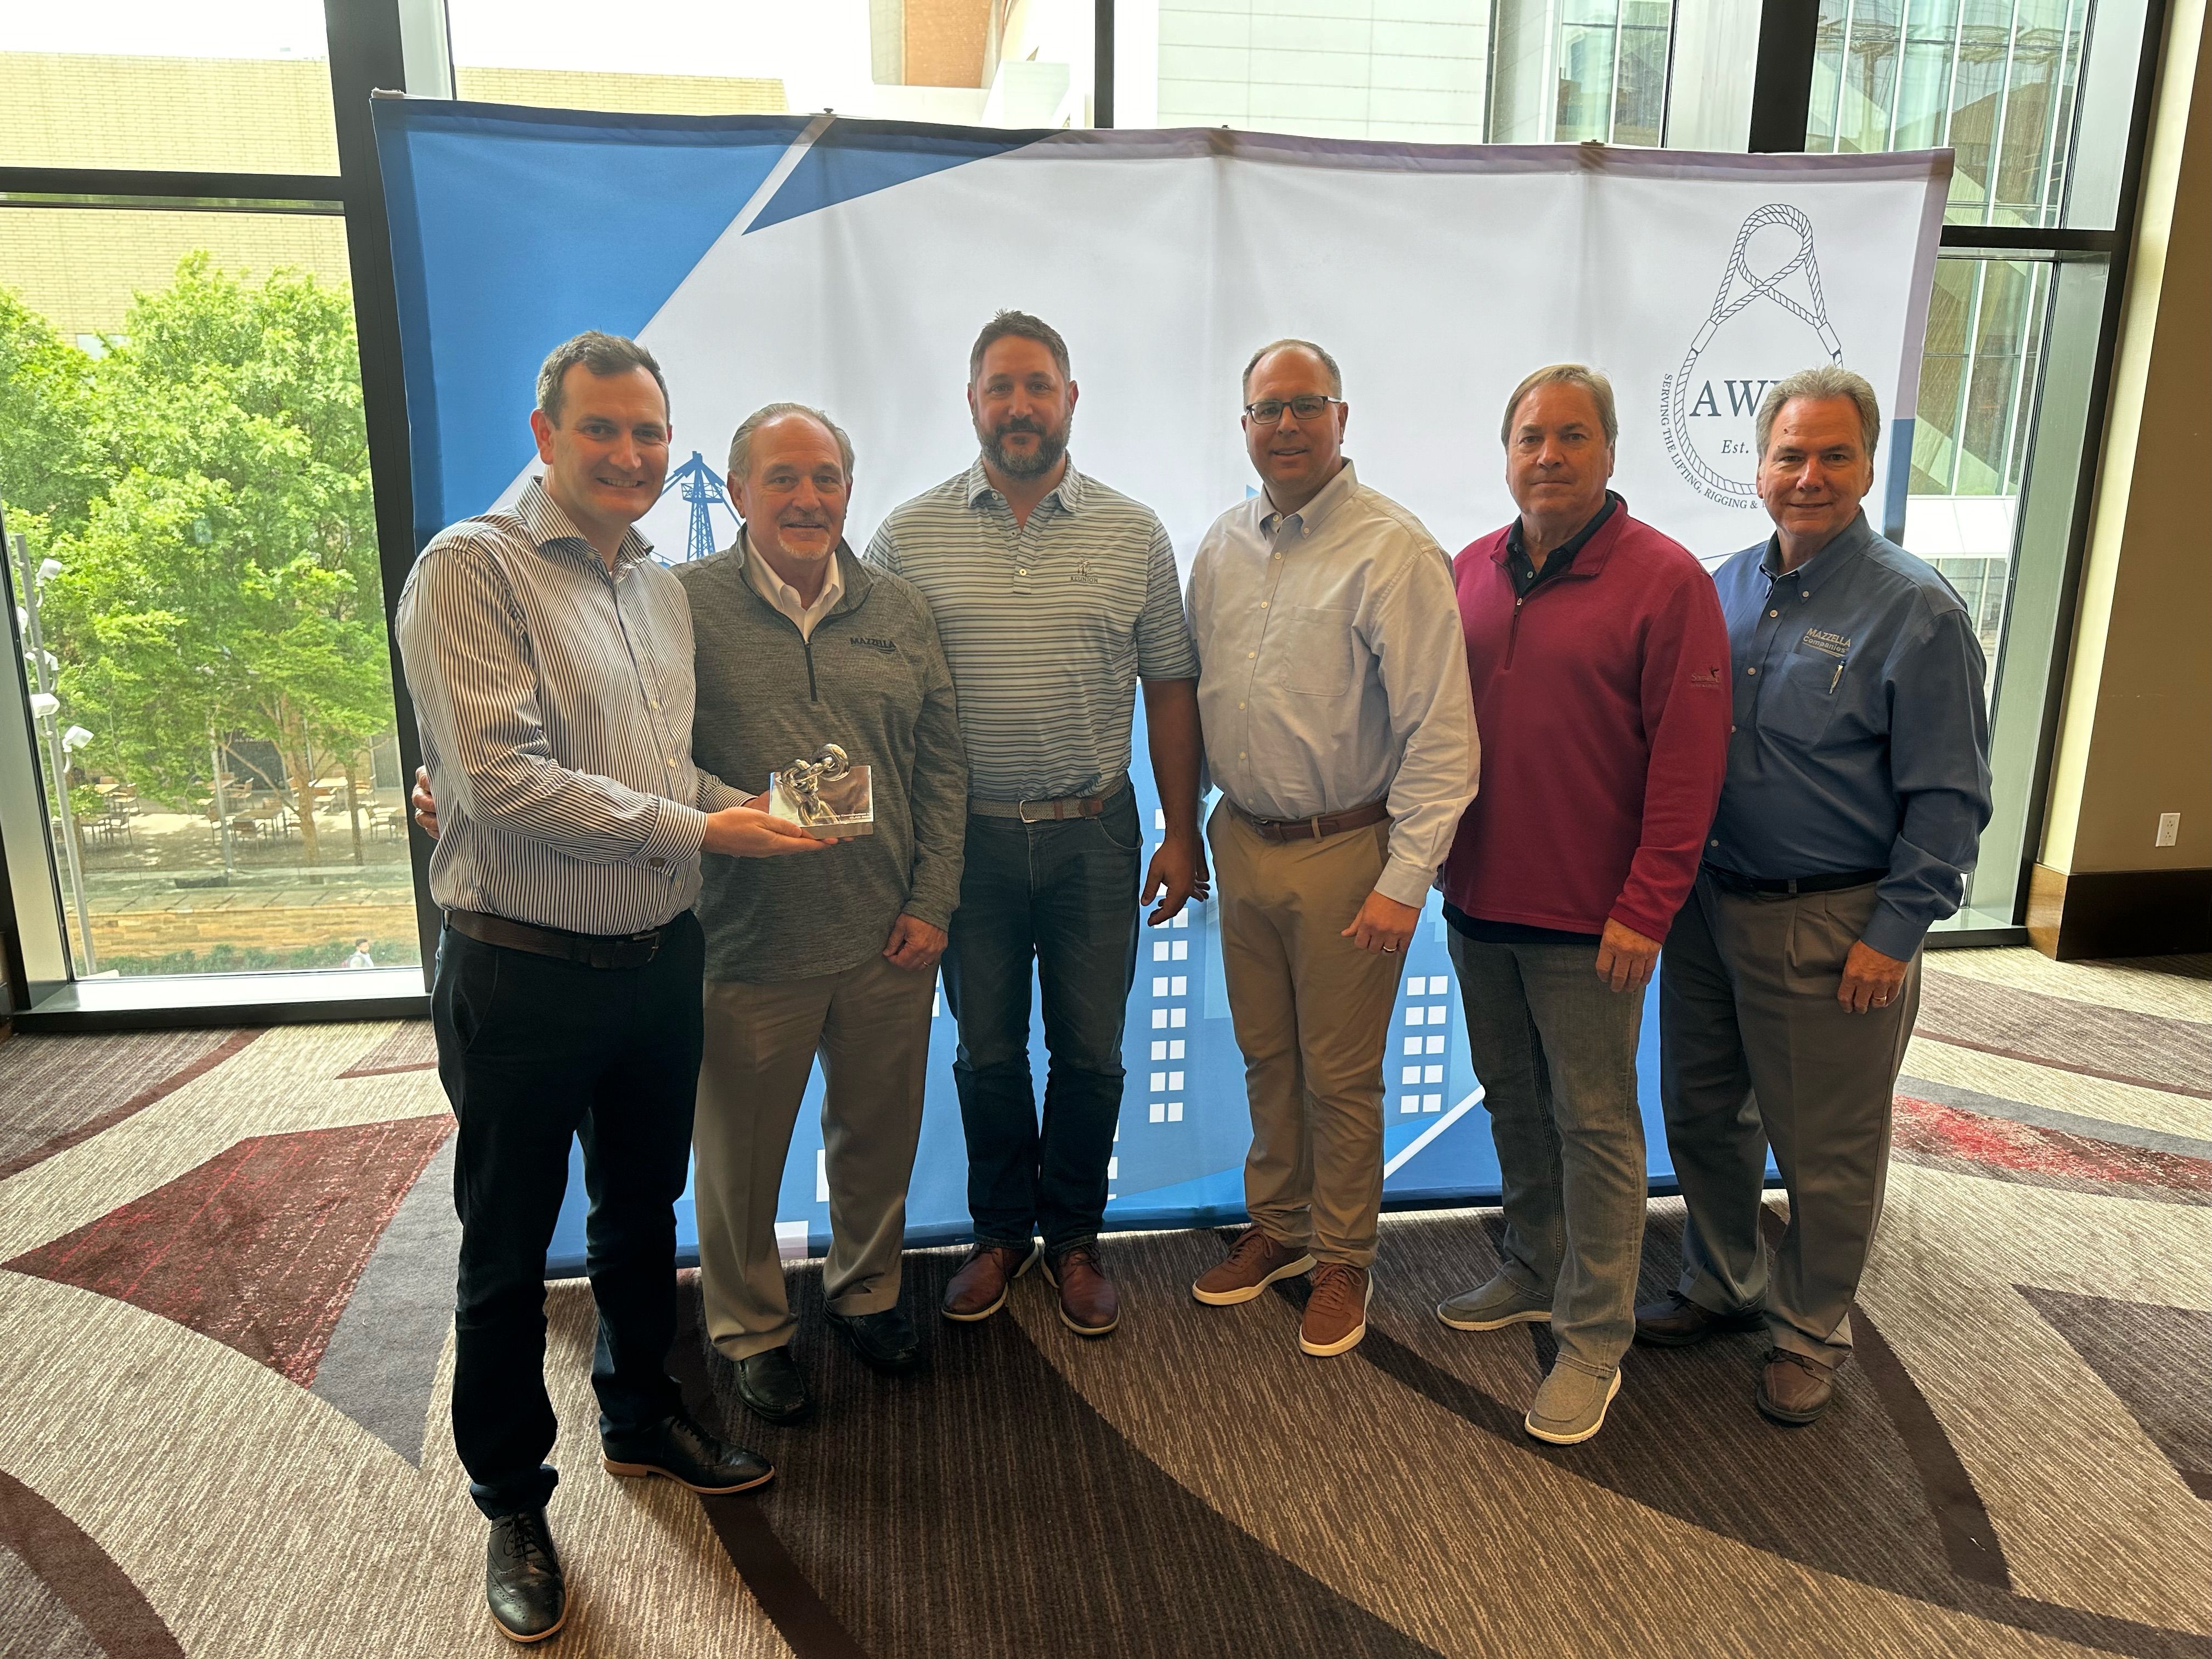 Caption: Ross Moloney, CEO, LEEA presents the award for the best contribution from a company or individual to #GLAD2023 to (left to right) Mazzella’s Tony Mazzella, CEO; Matt Mazzella, president; Eric Parkerson, vice president of rigging; Mike Lindsey, vice president of supply chain; and Jim Takacs, director of corporate supply chain.